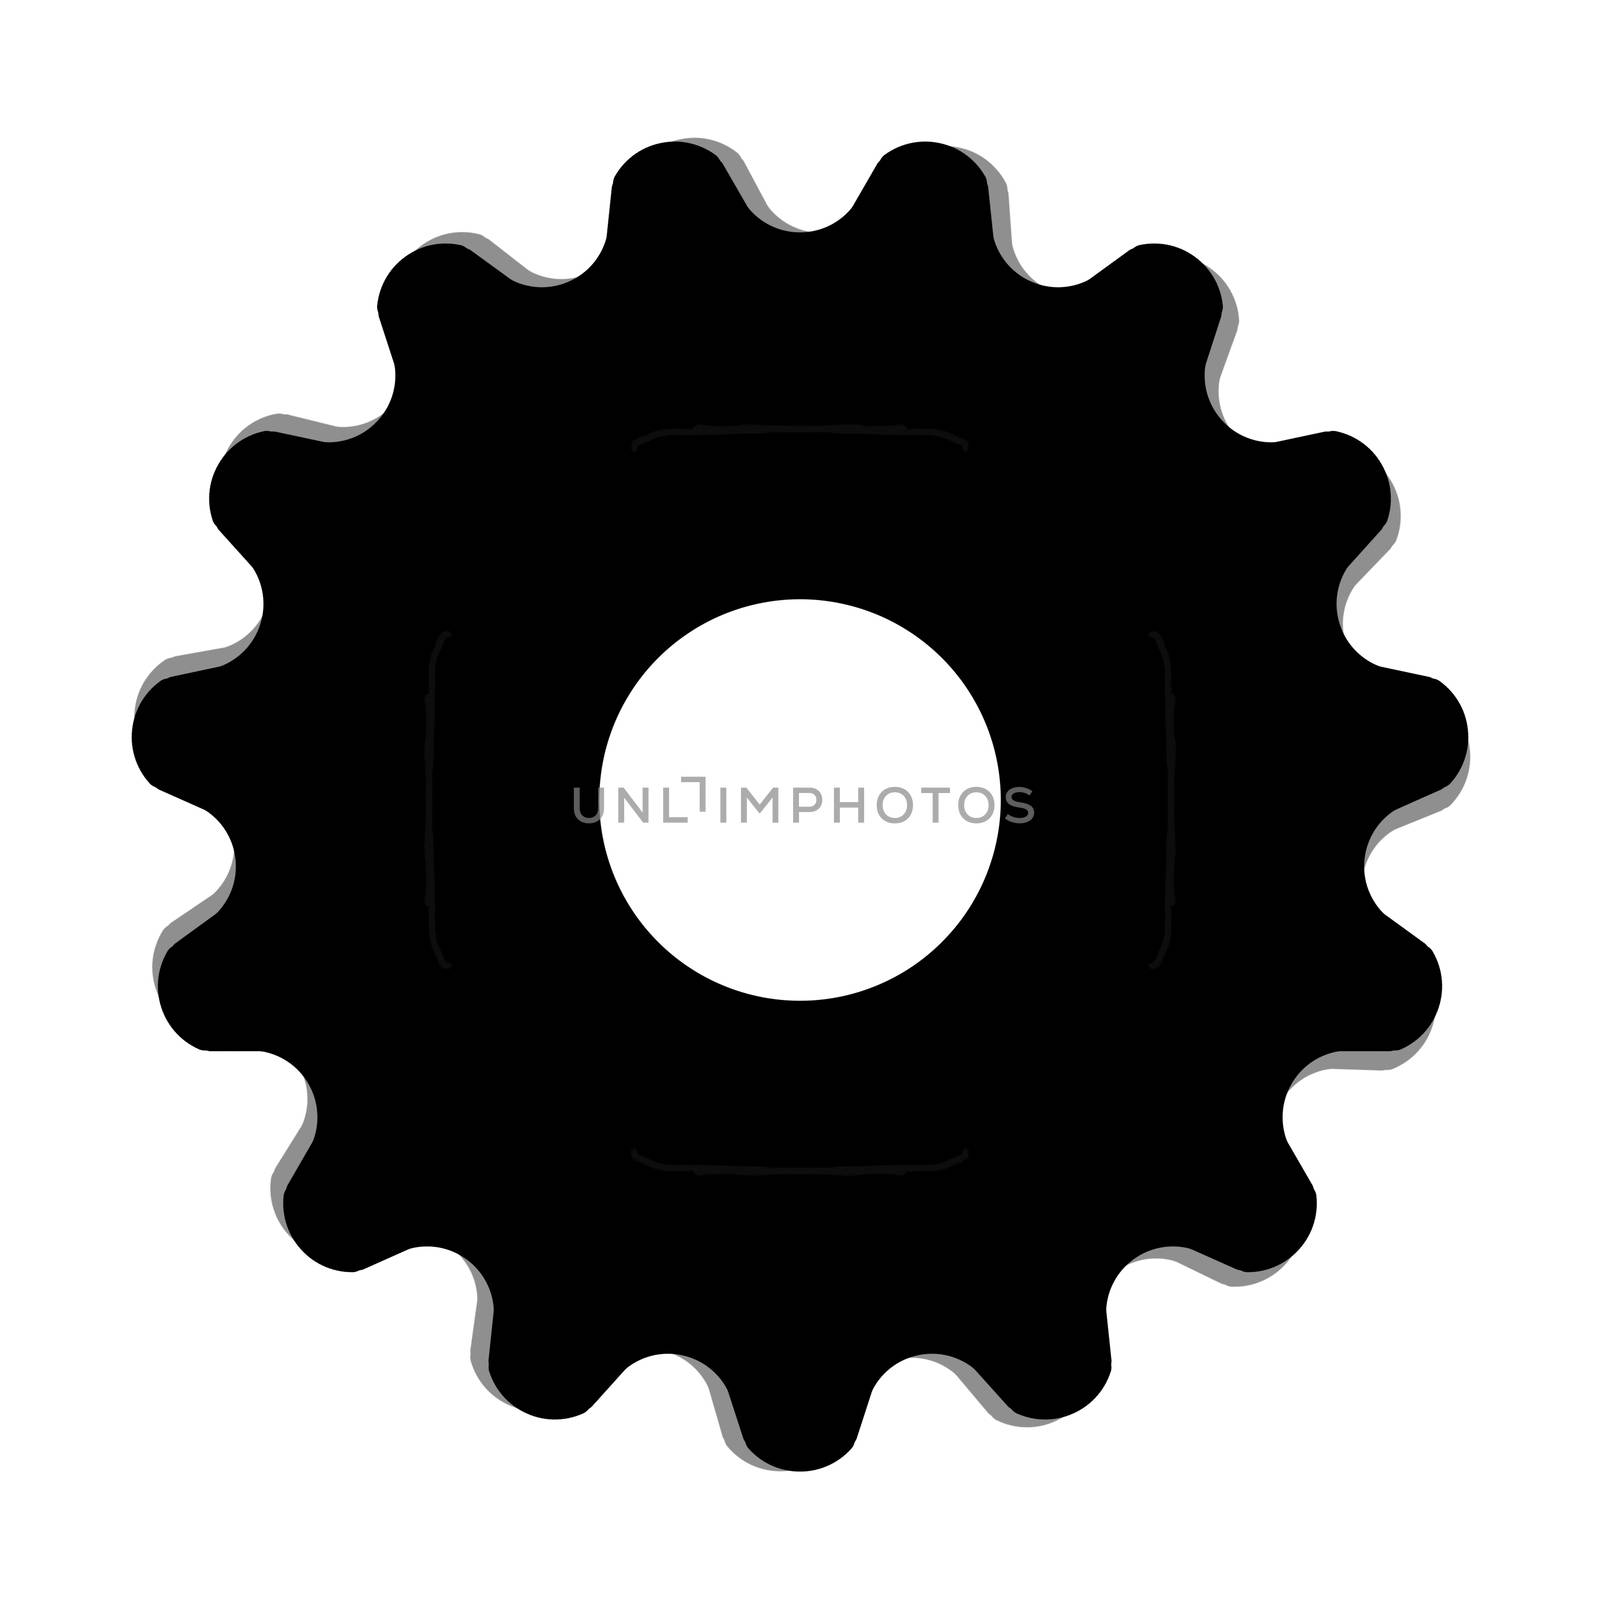 Gear or cog icon on white background.Technological driving, symbol,